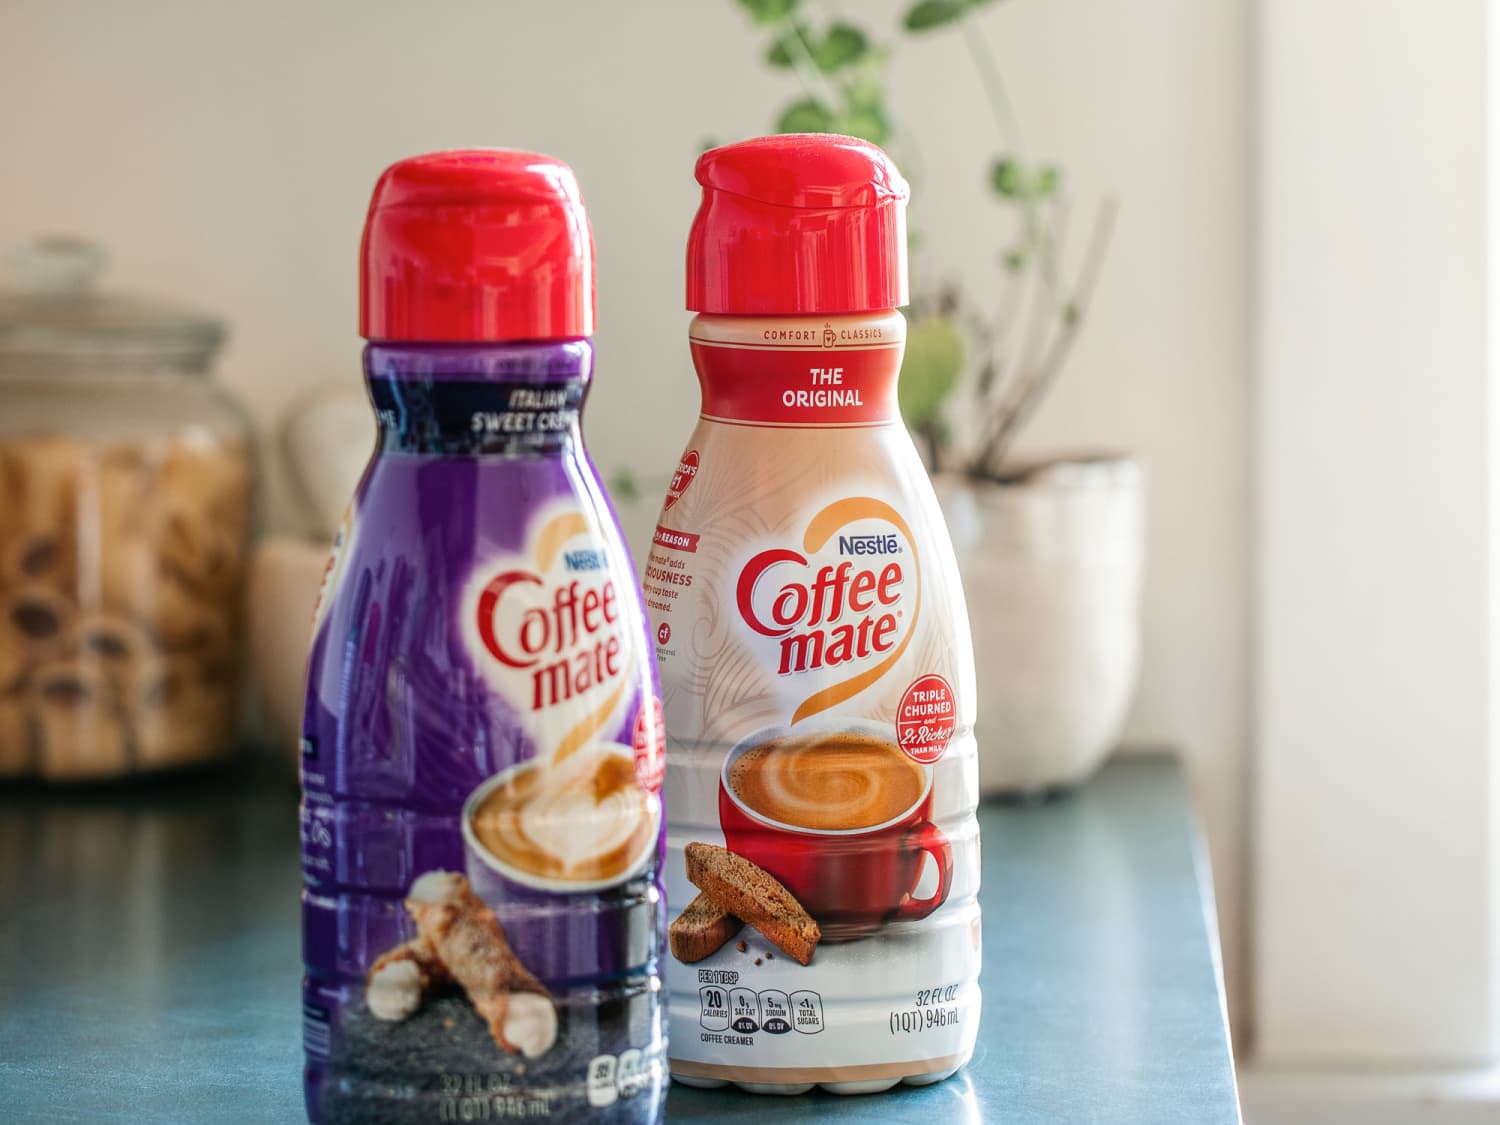 Use Empty Plastic Coffee Creamer Container as Storage for Dry